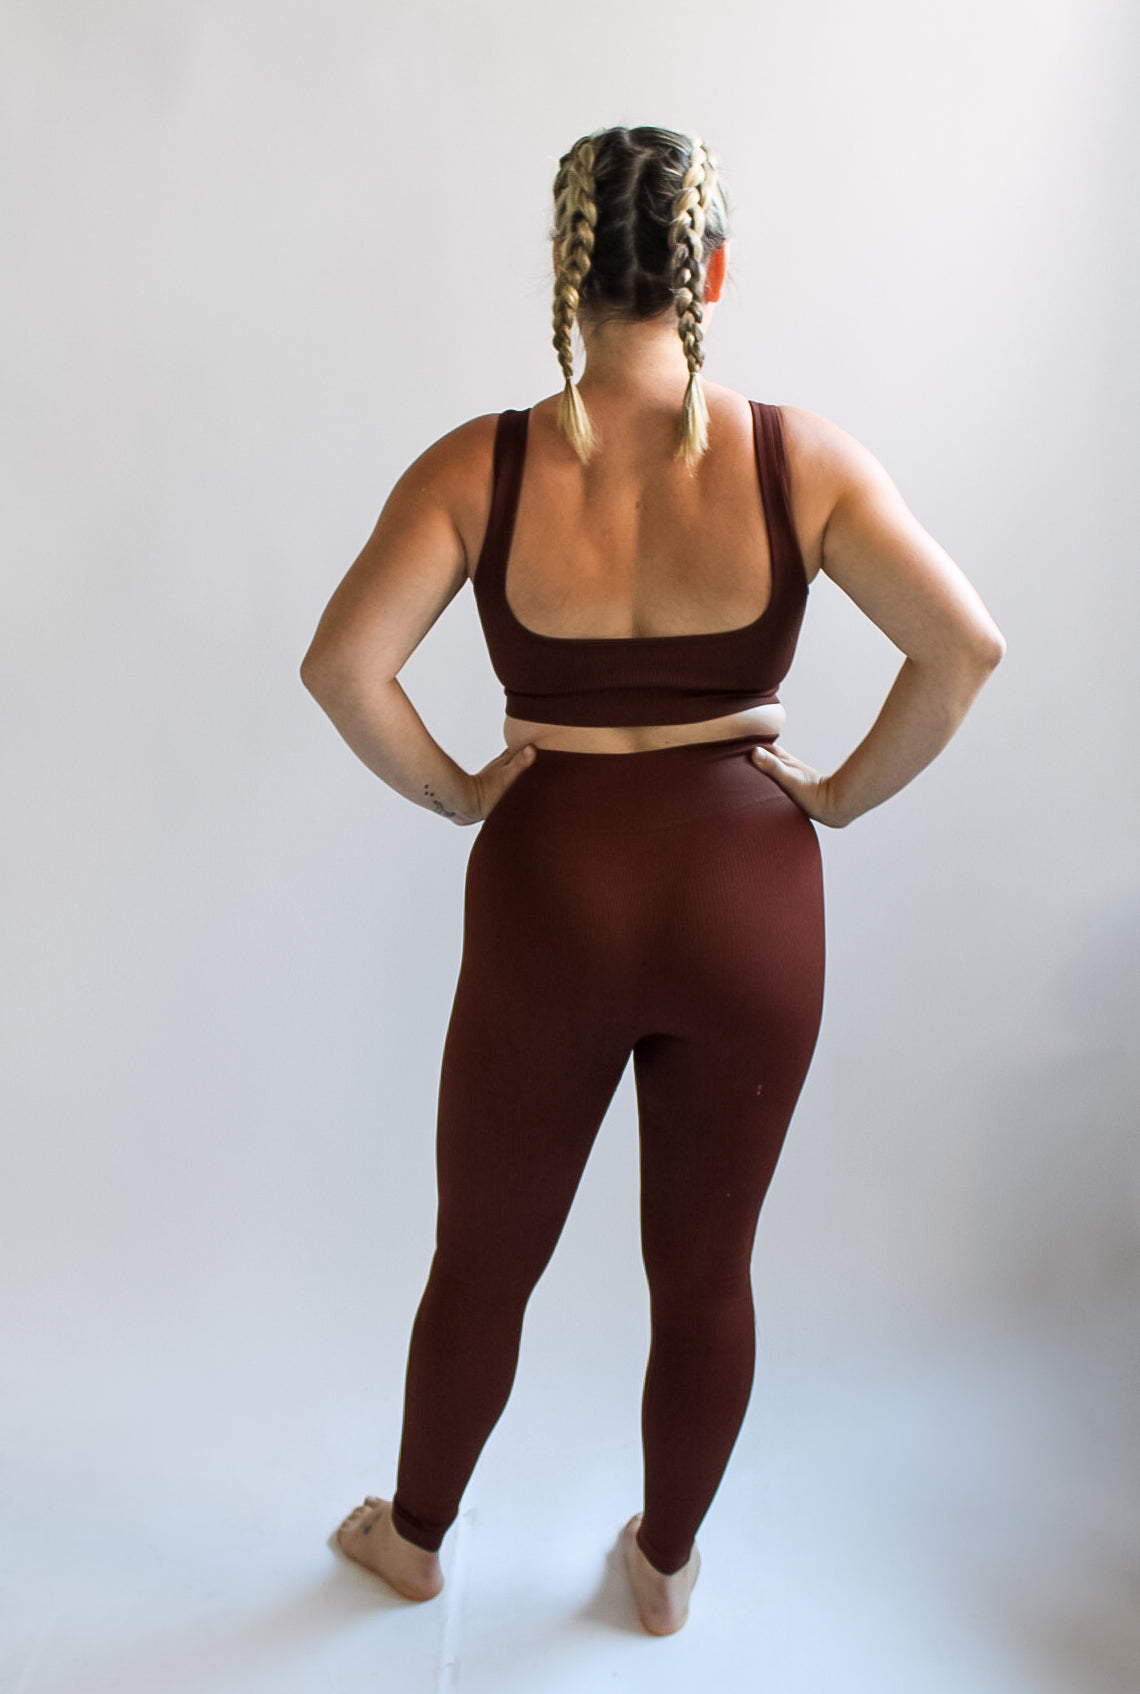 Mayround Seamless Women Yoga Suit 2 Pieces Ribbed